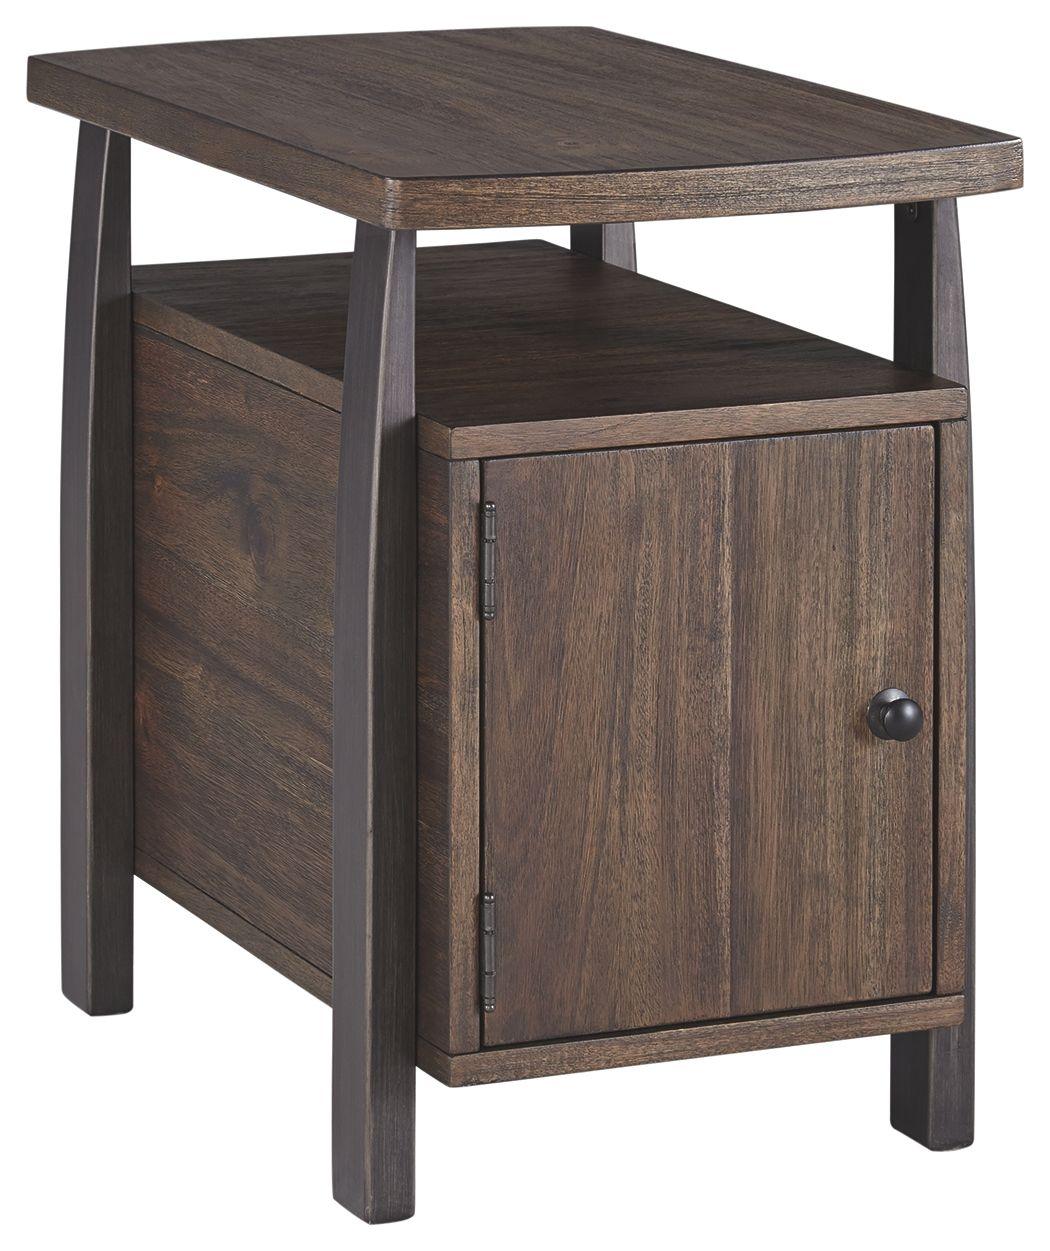 Ashley Furniture - Vailbry - Brown - Chair Side End Table - 5th Avenue Furniture